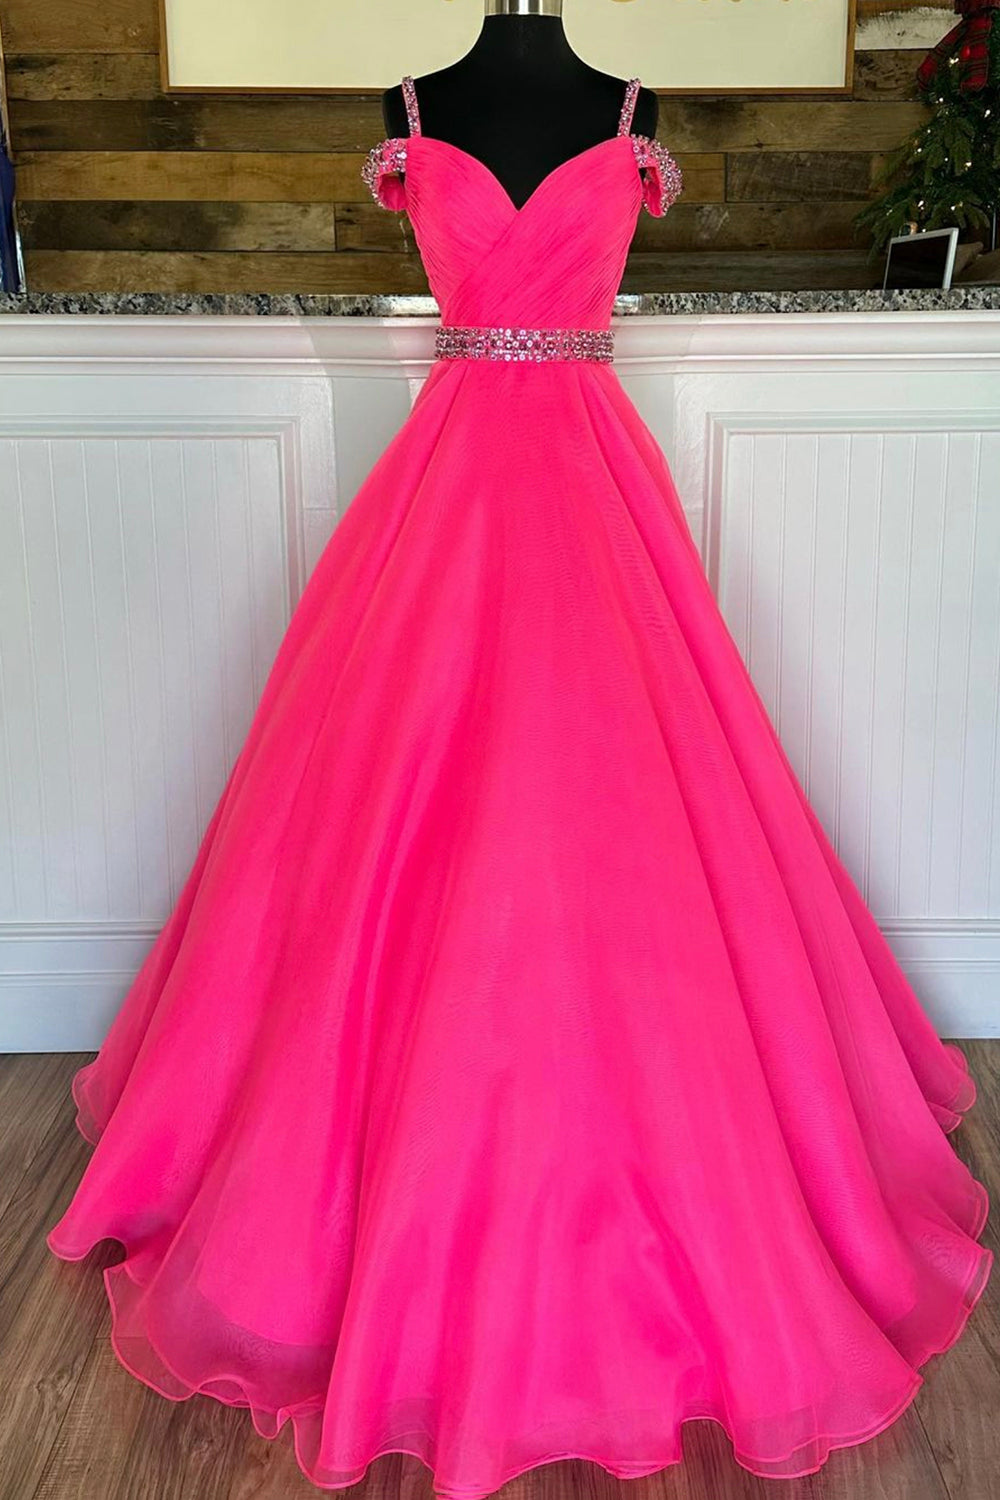 Off Shoulder Tulle Beaded Long Formal Dress Outfits For Girls, Hot Pink Evening Party Dress